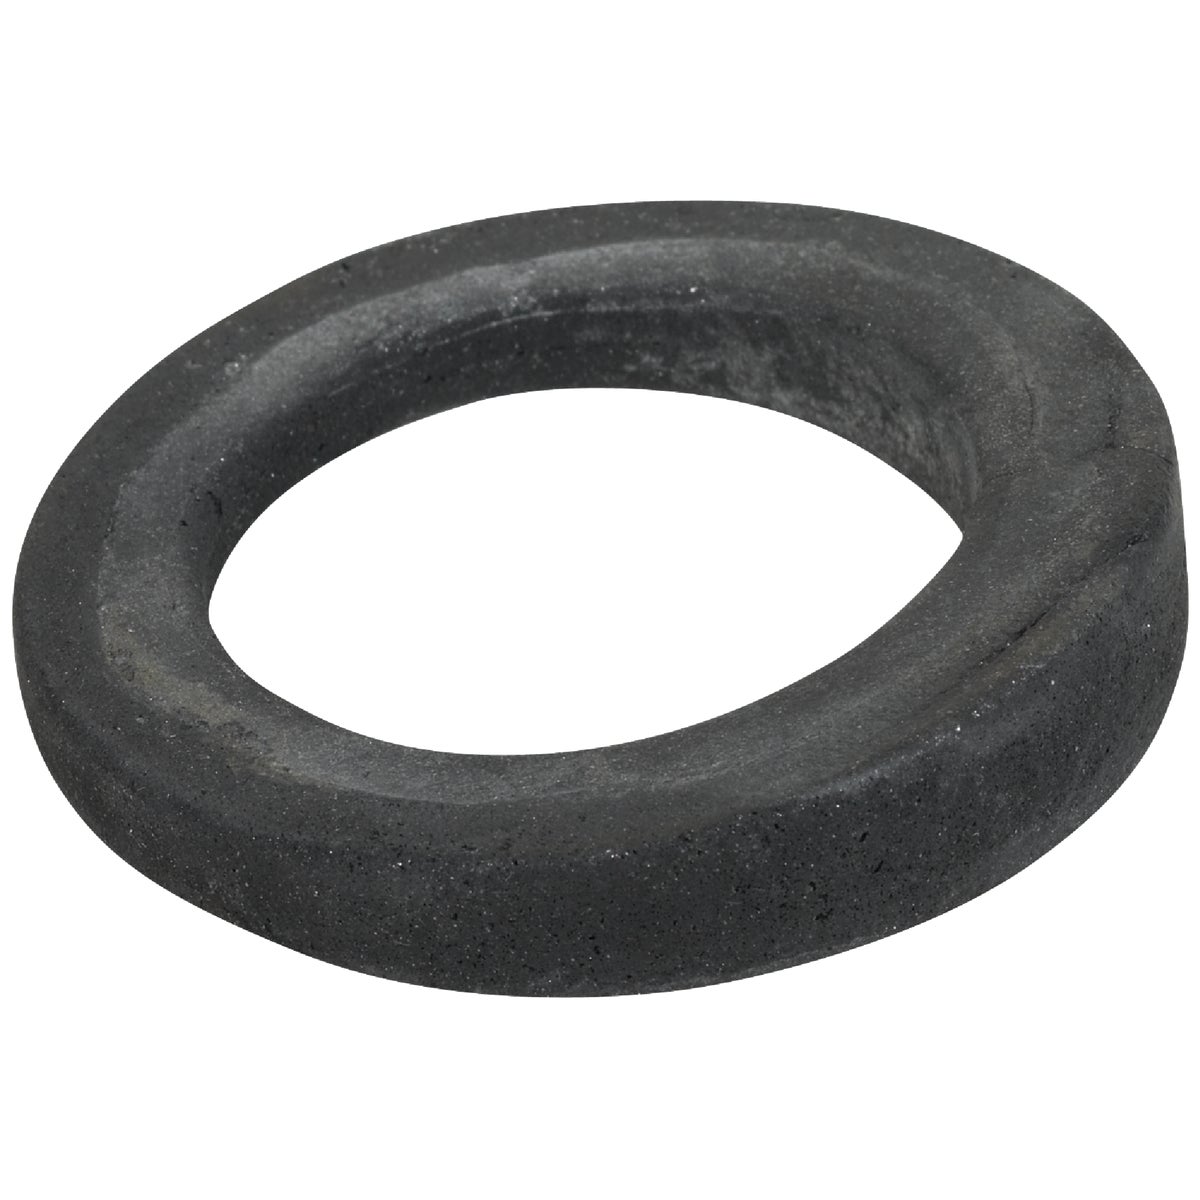 Item 434328, Beveled rubber 2-3/16" I.D. Use for tight seal on tubs with sloping walls.